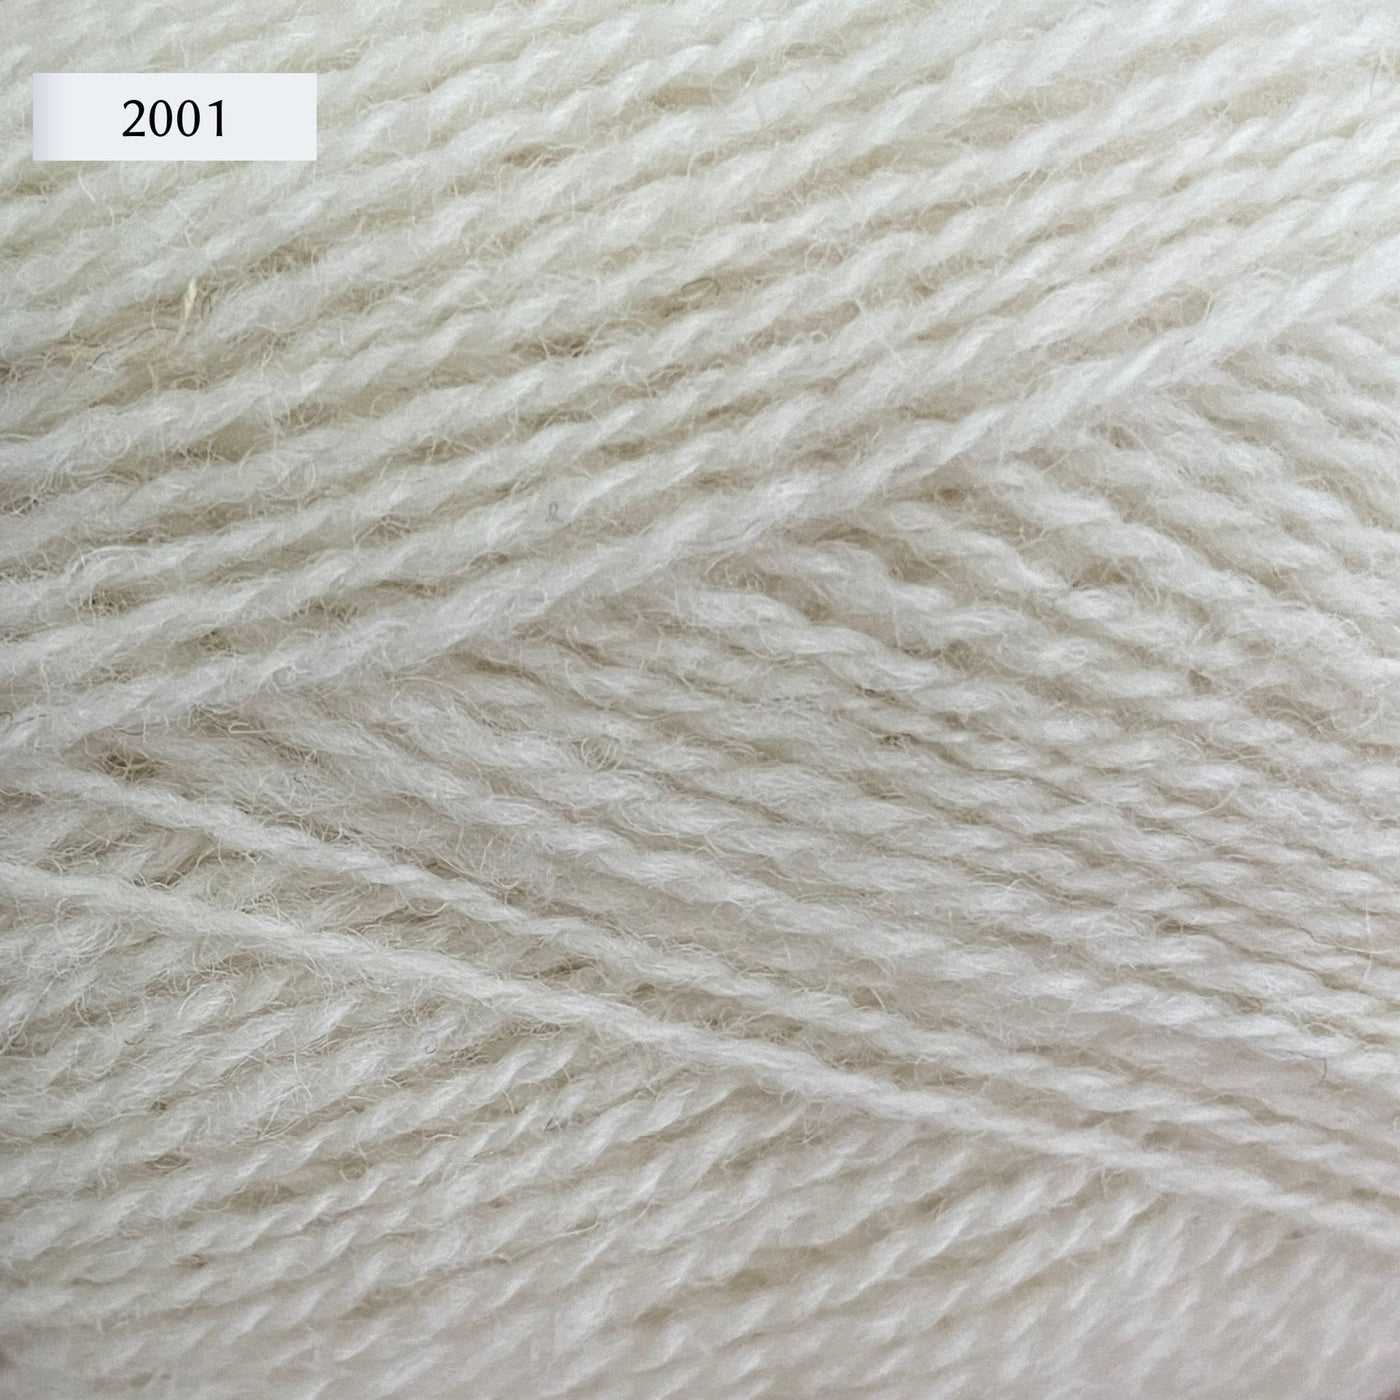 Jamieson & Smith Shetland Supreme, a fingering weight wool yarn, in color 2001, white